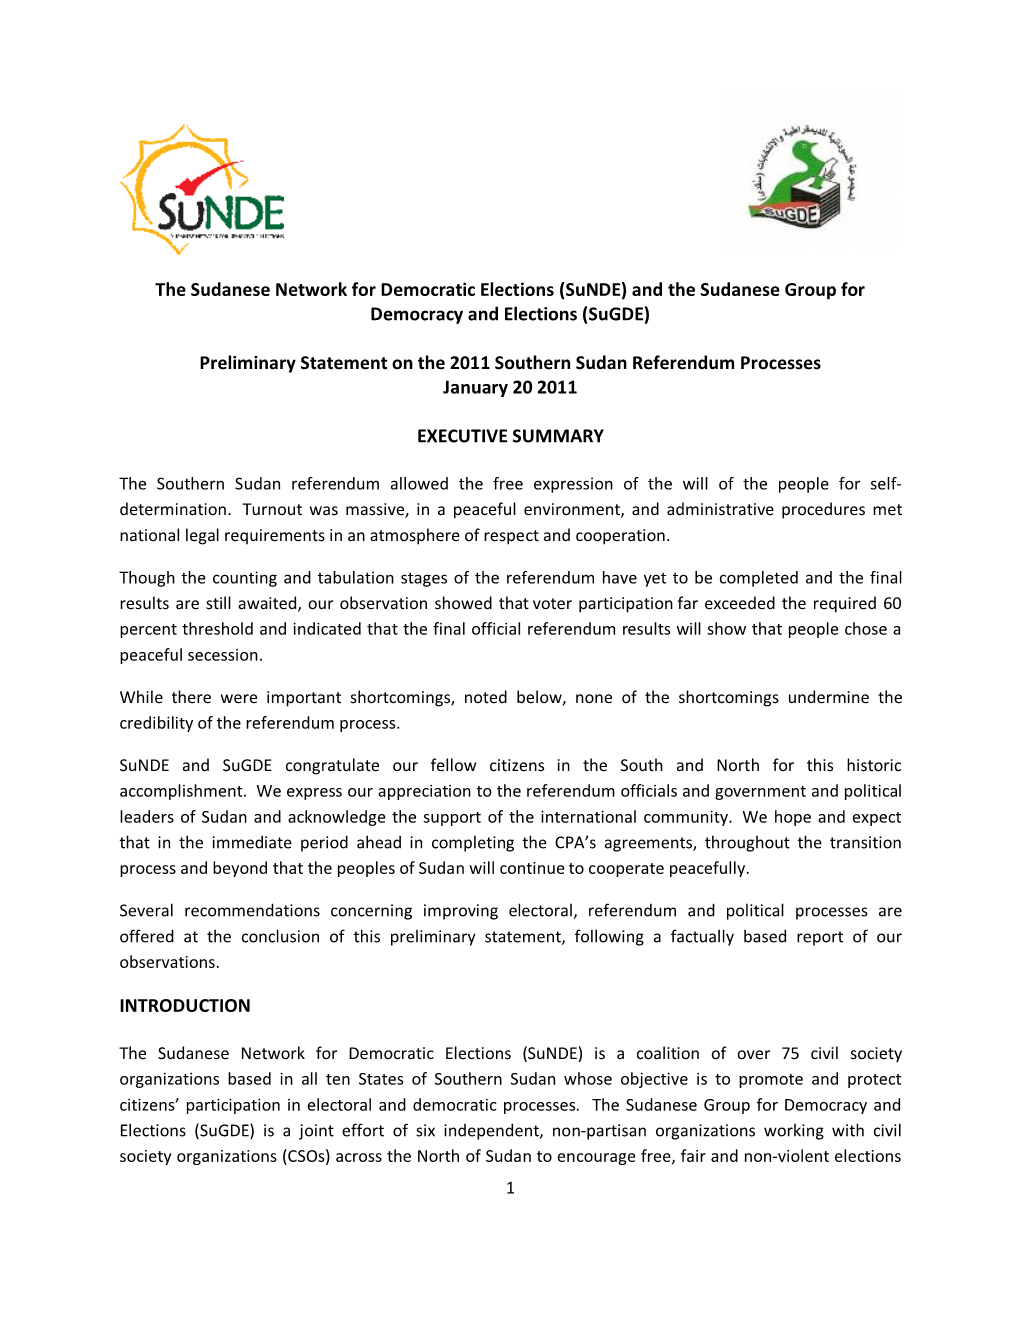 The Sudanese Network for Democratic Elections (Sunde) and the Sudanese Group for Democracy and Elections (Sugde) Preliminary